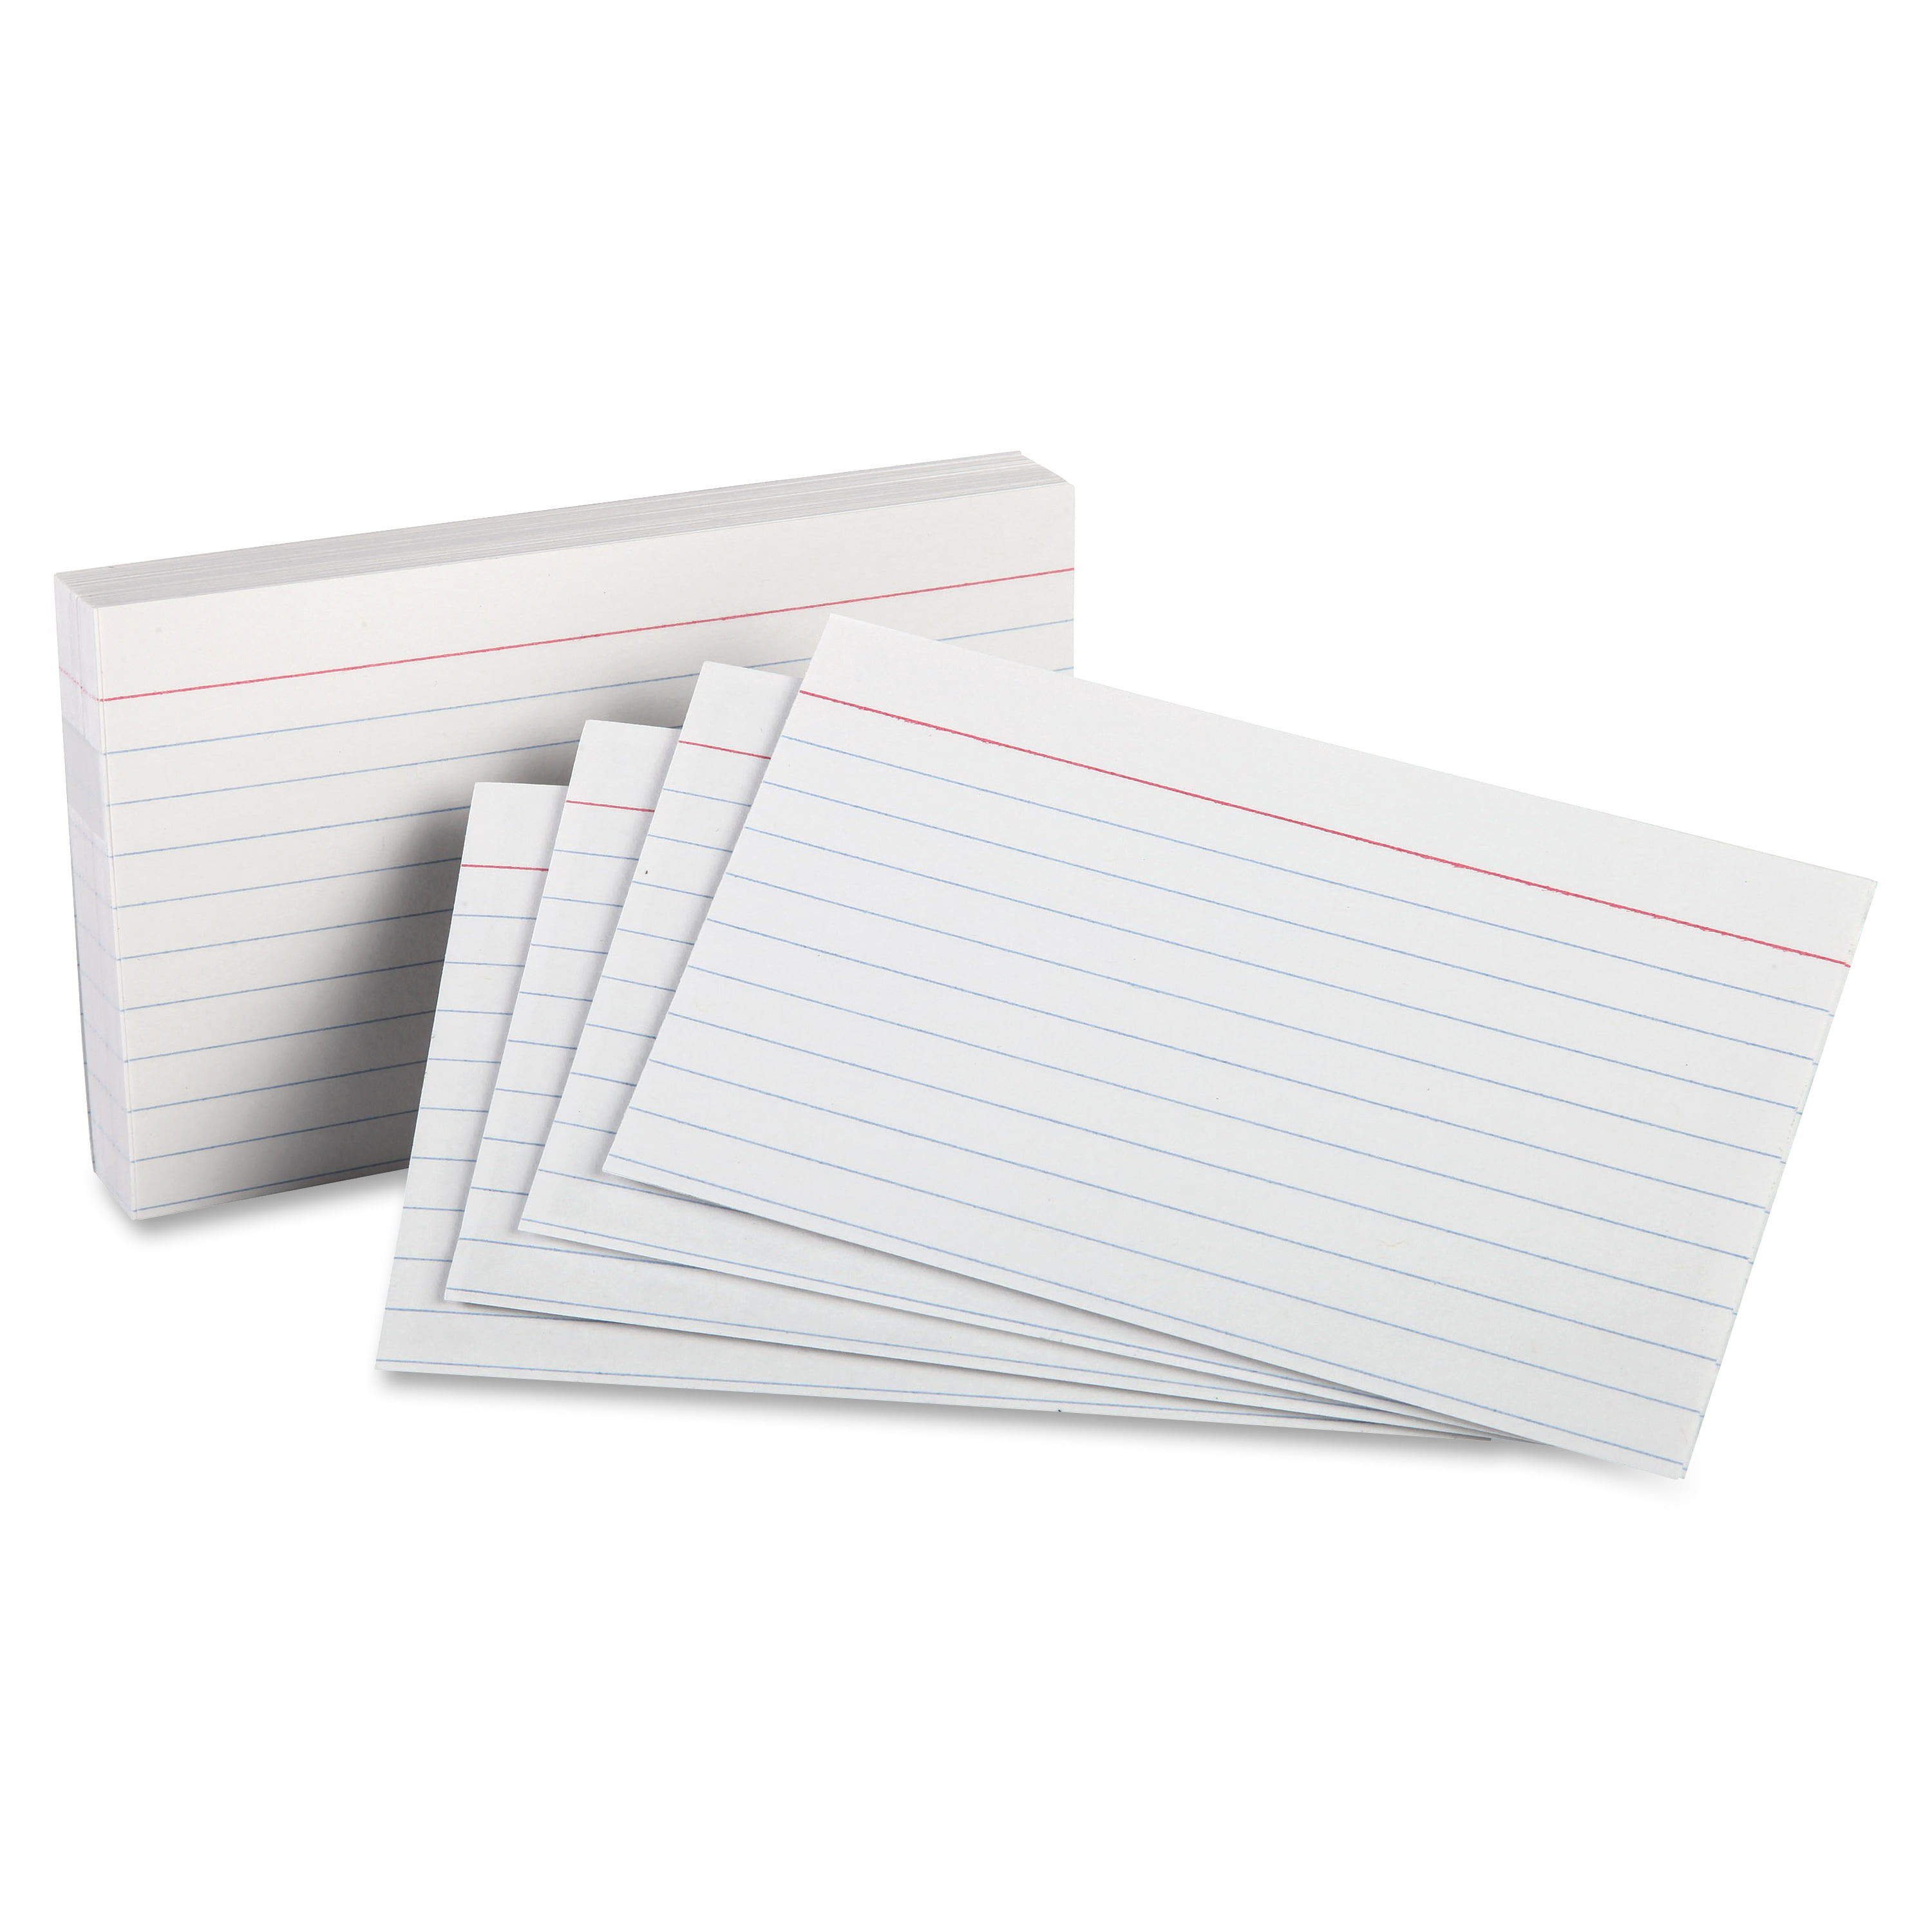 Oxford Ruled Index Cards 5 x 8 White 2 Pack 100/Pack 51